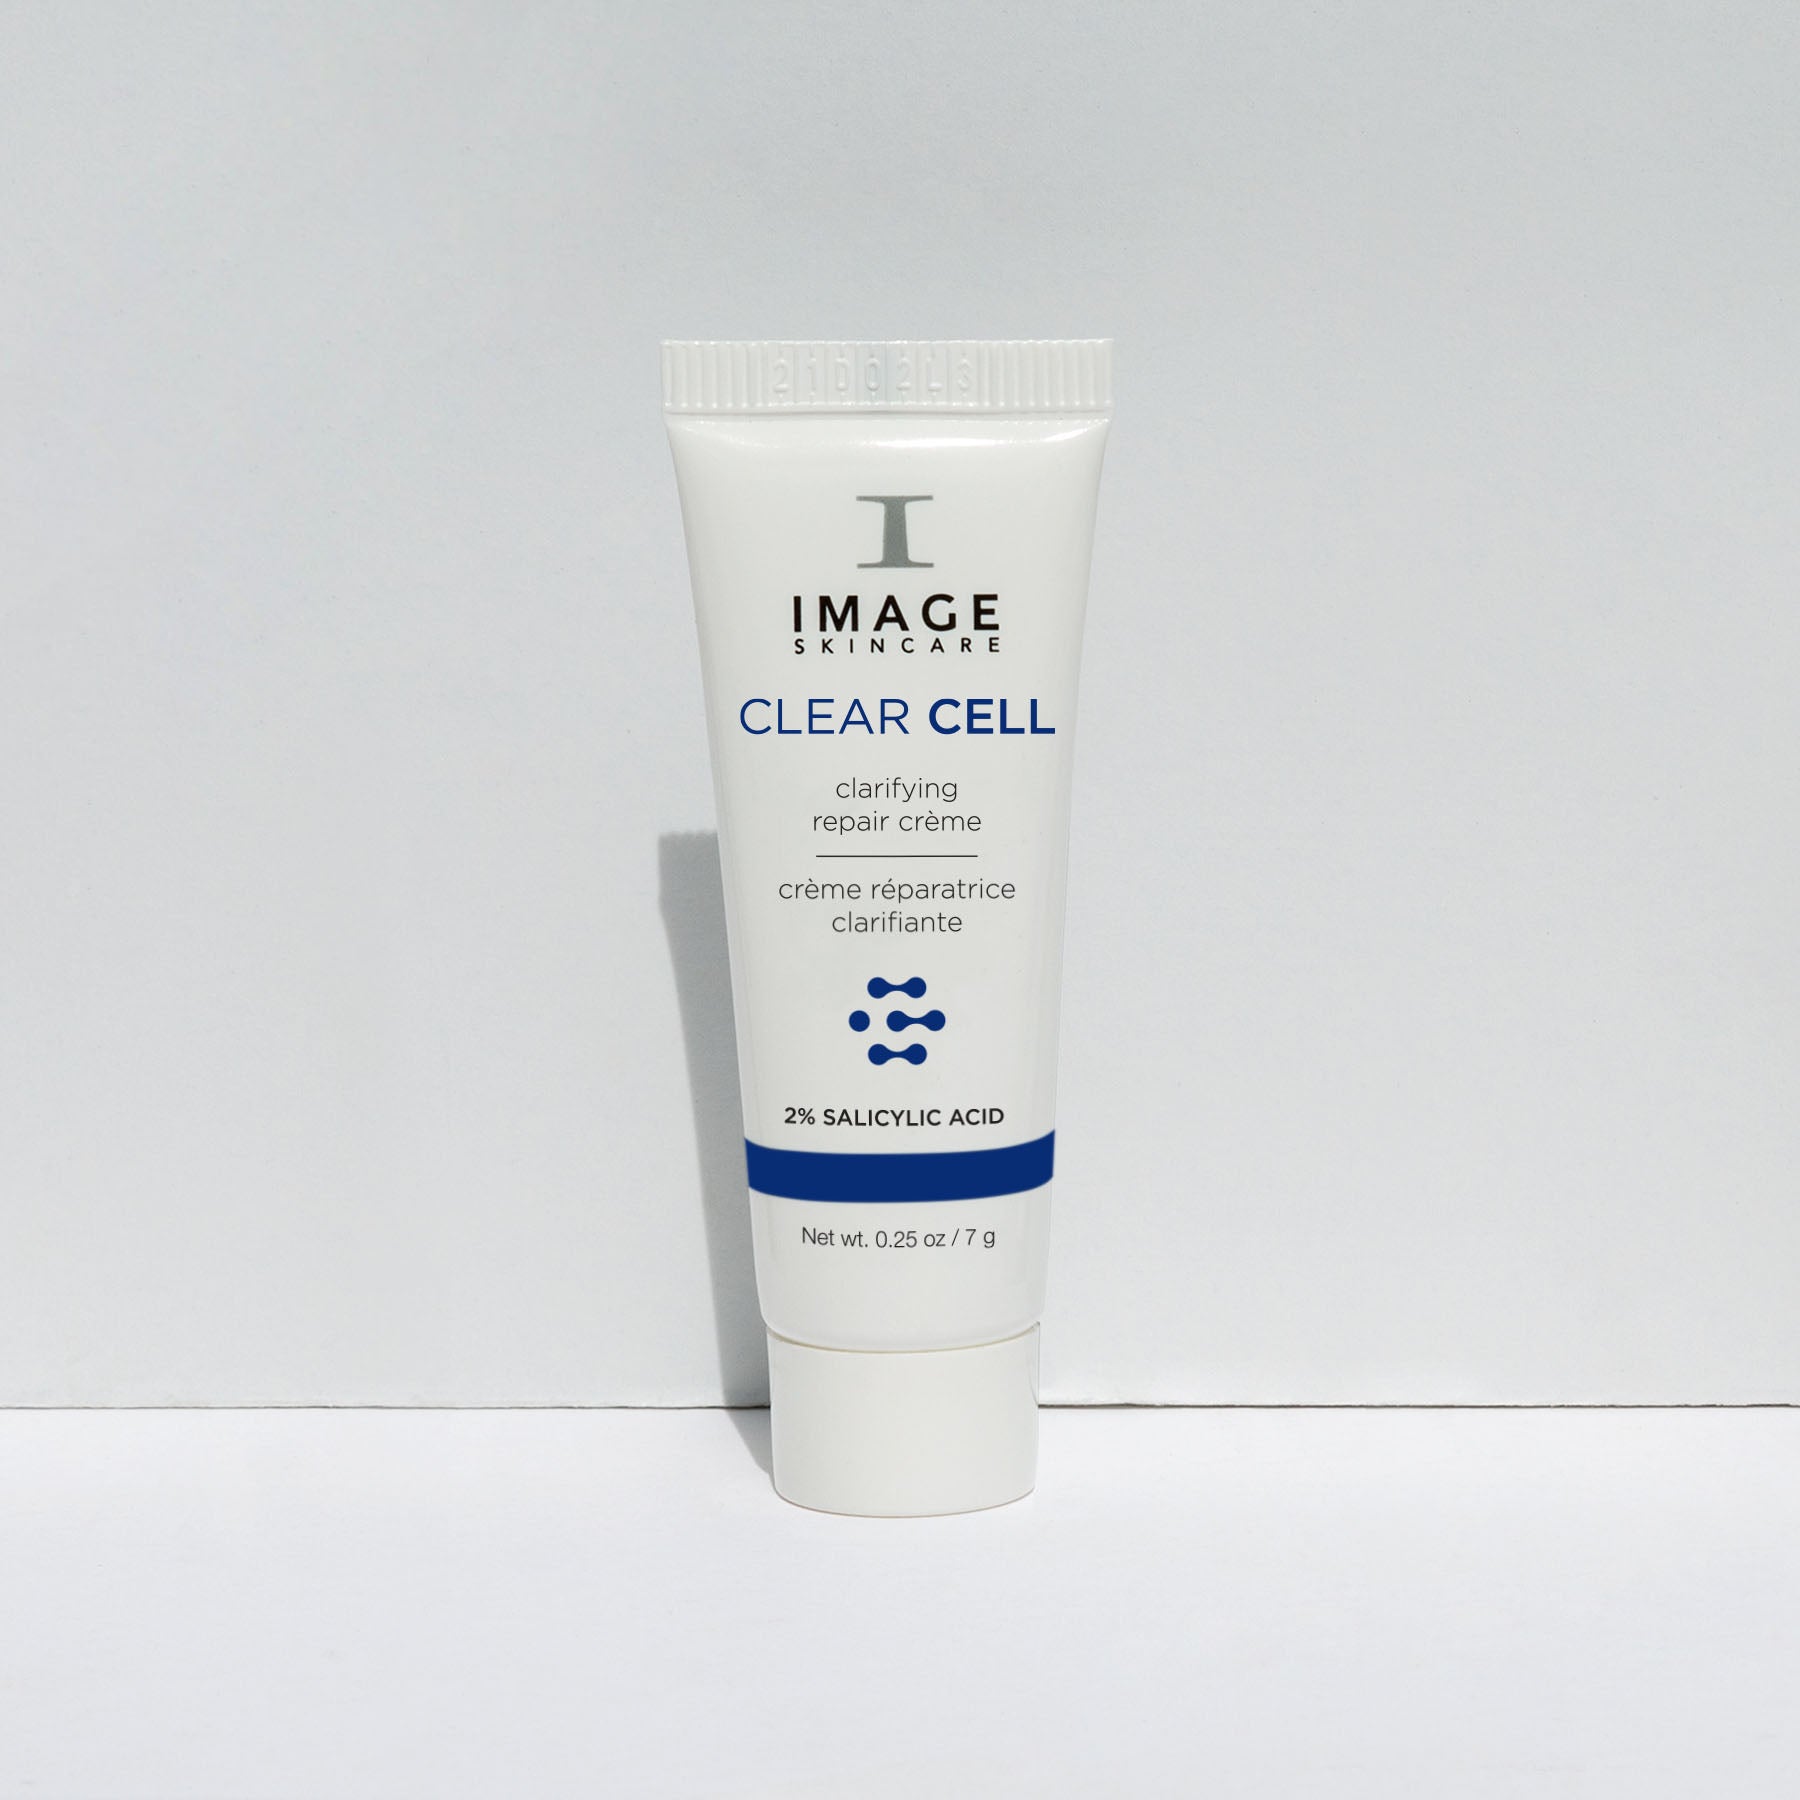 Clear Cell clarifying repair creme sample